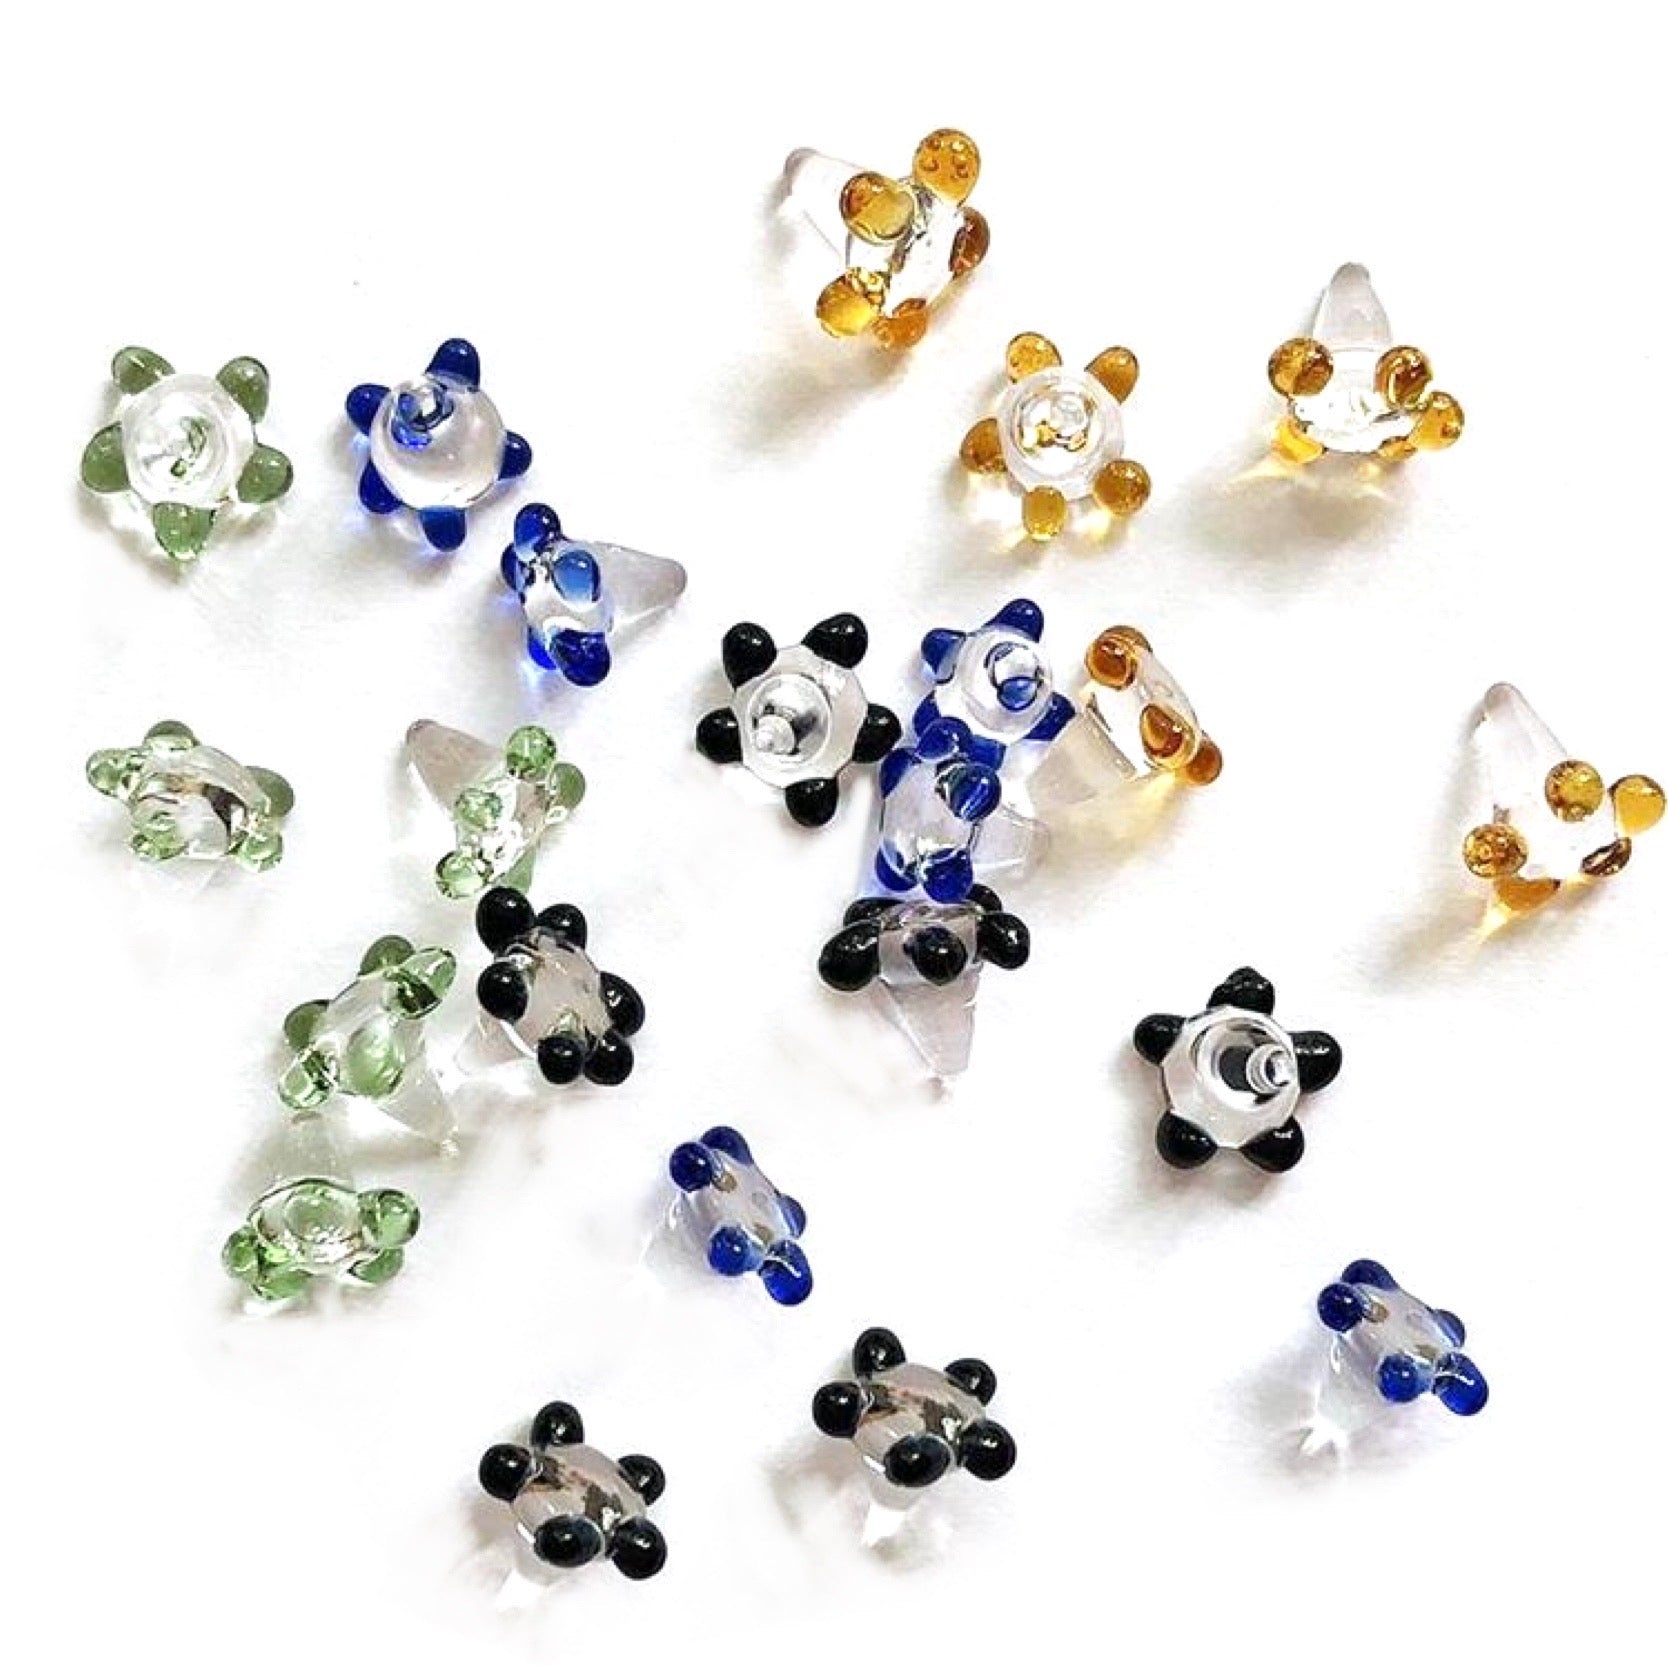 10 Premium Glass Daisy Pipe Screens (1/4 - 3/8) with Small